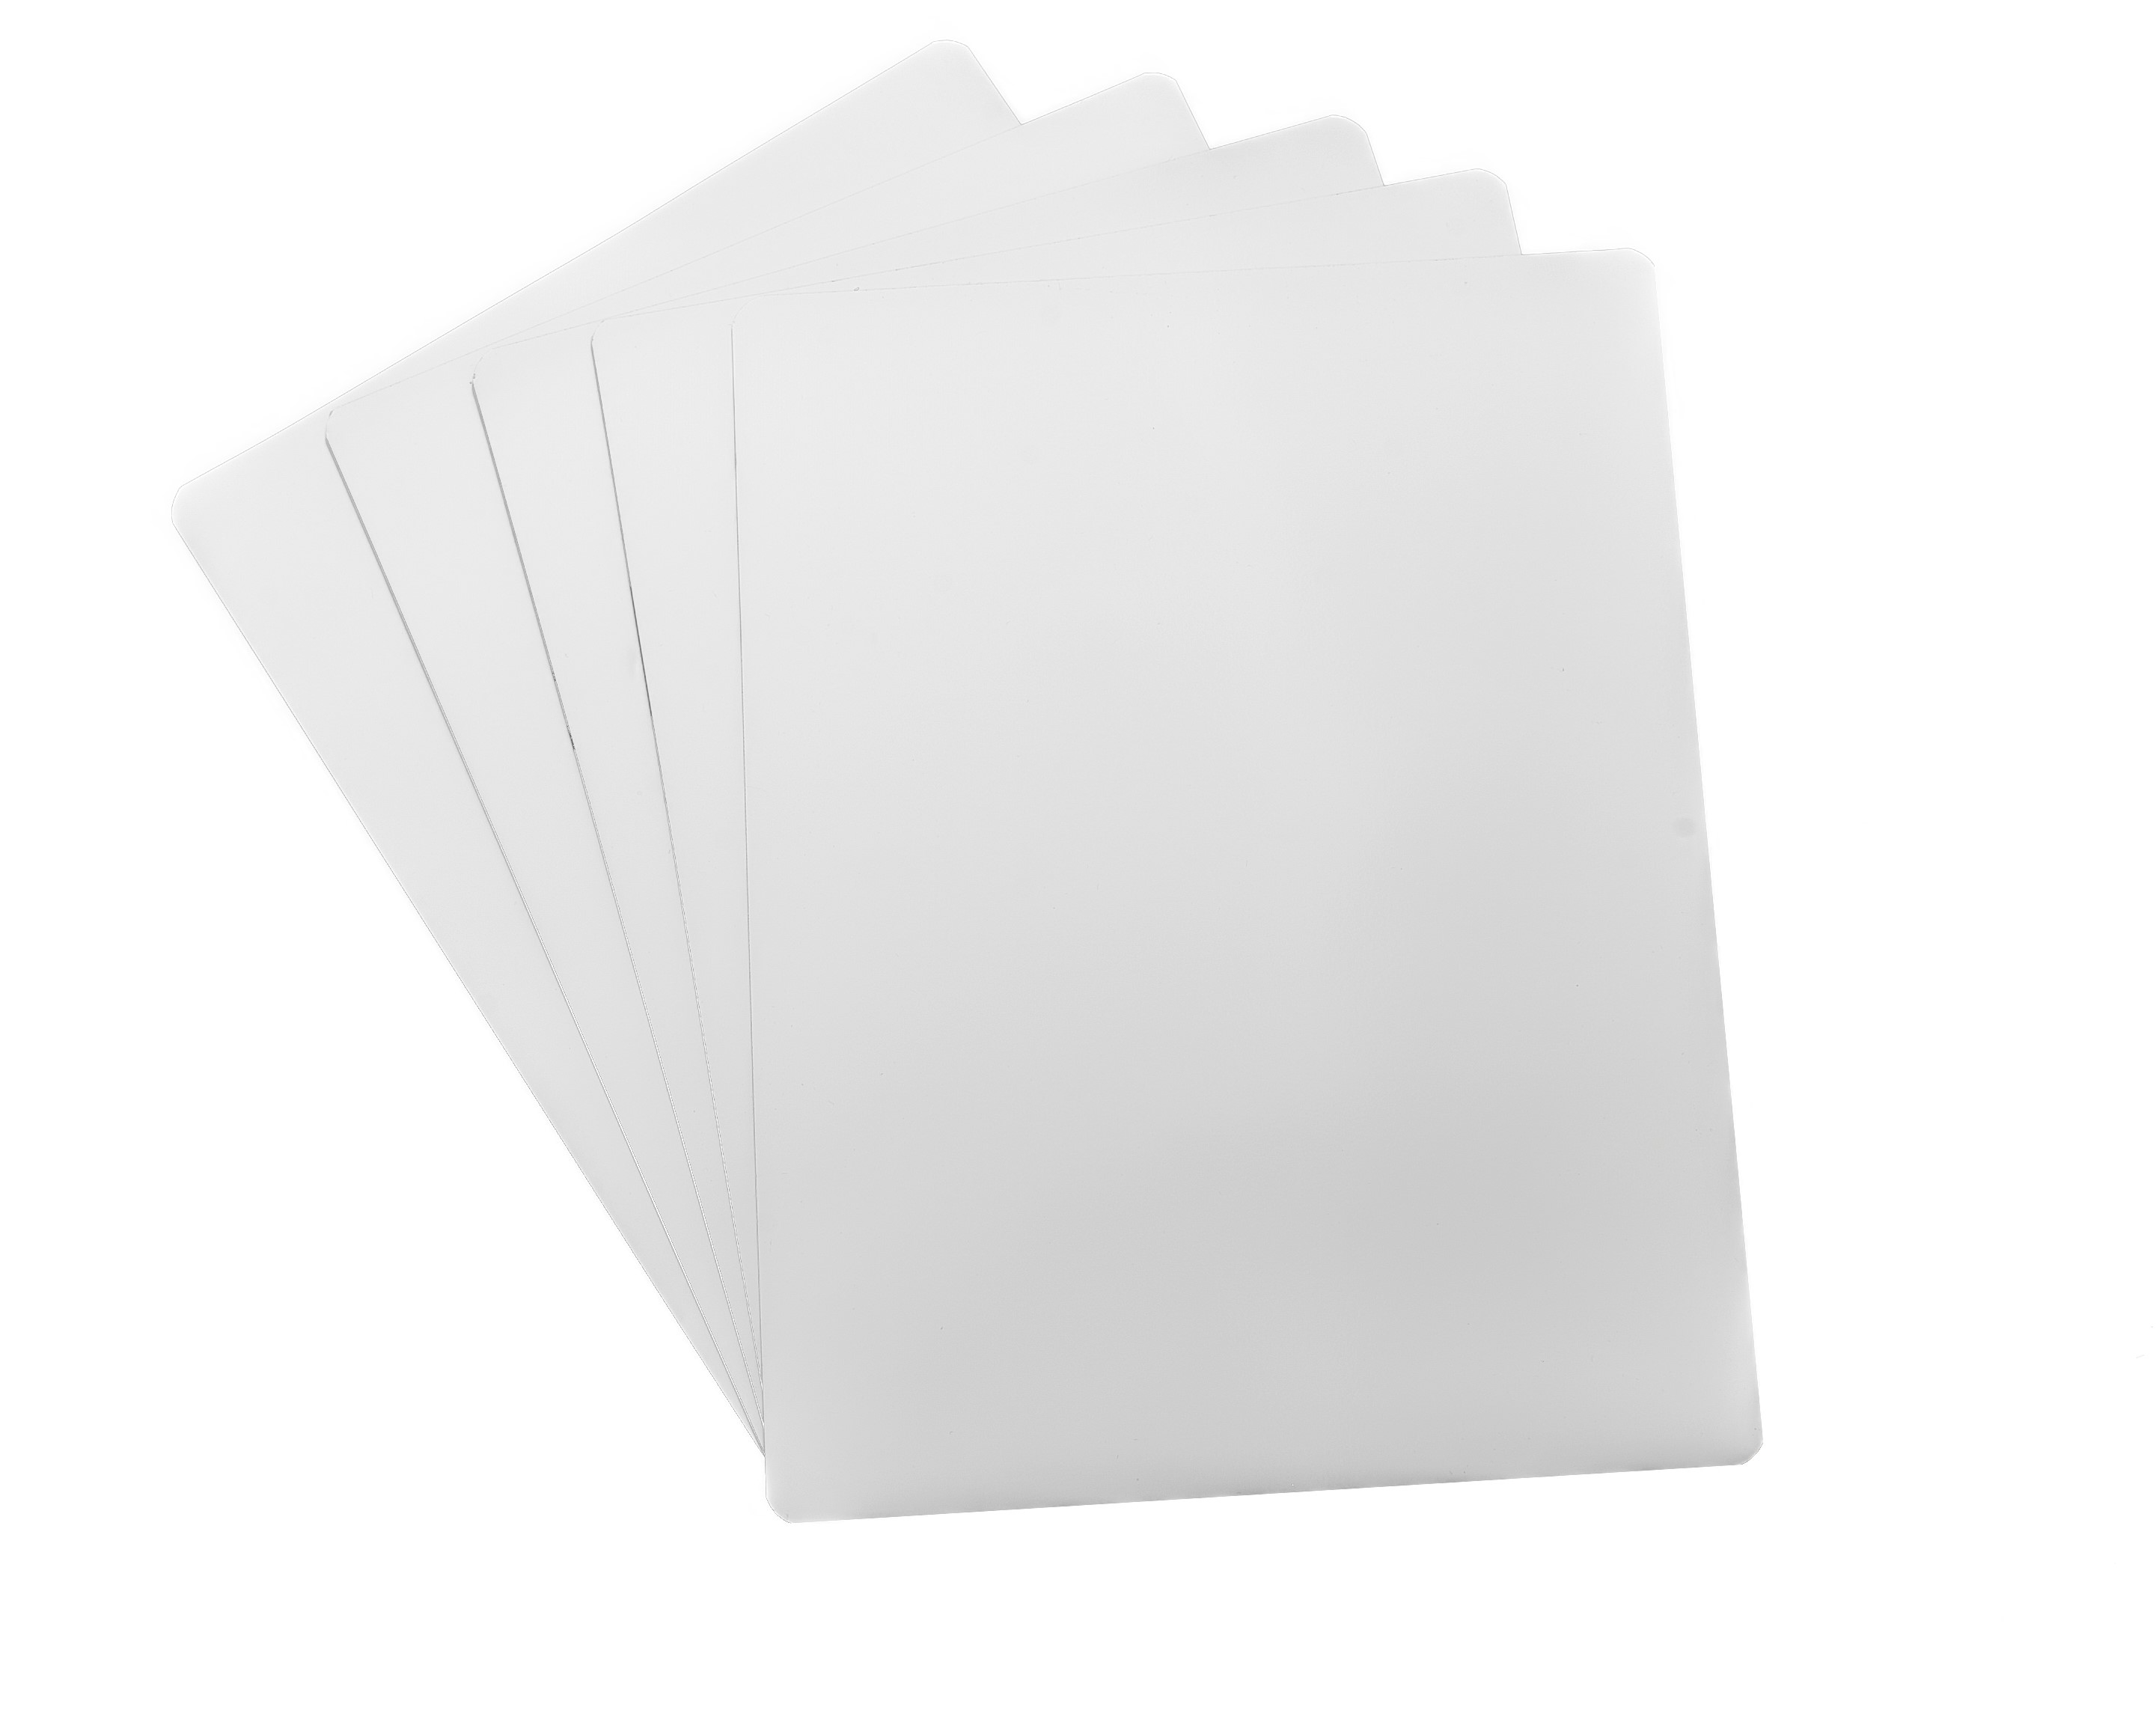 dry-erase-white-magnet-sheet-12-x-18-5-sheets-discount-magnet